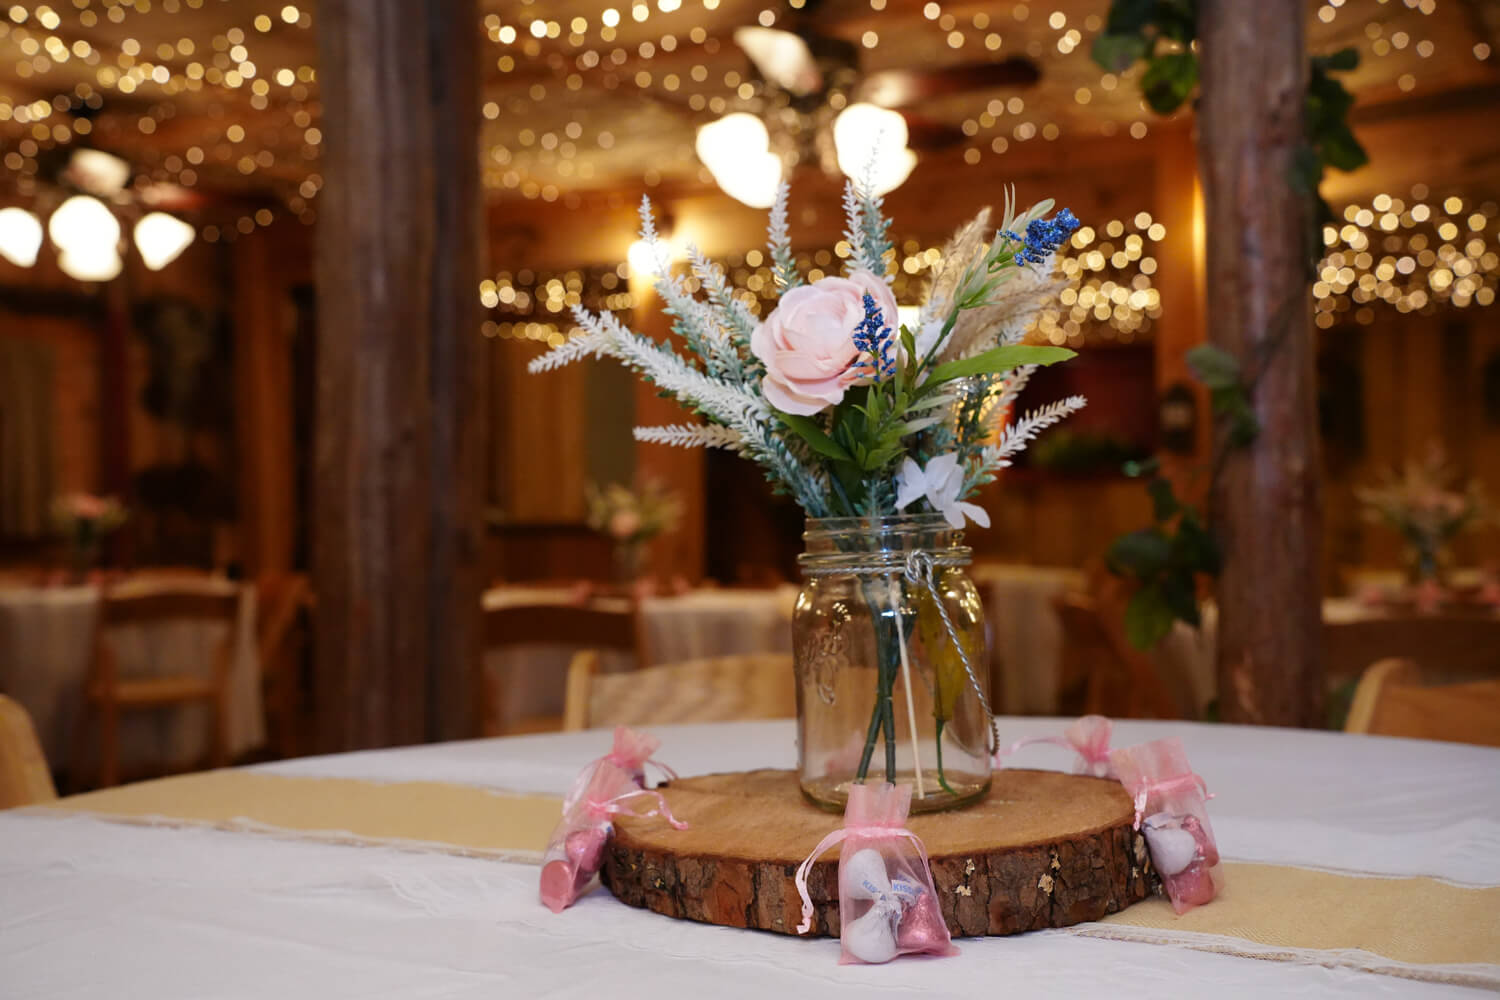 Glass vases with greenery and pink flowers sitting on a log slice on a reception table in a country chic barn wedding venue